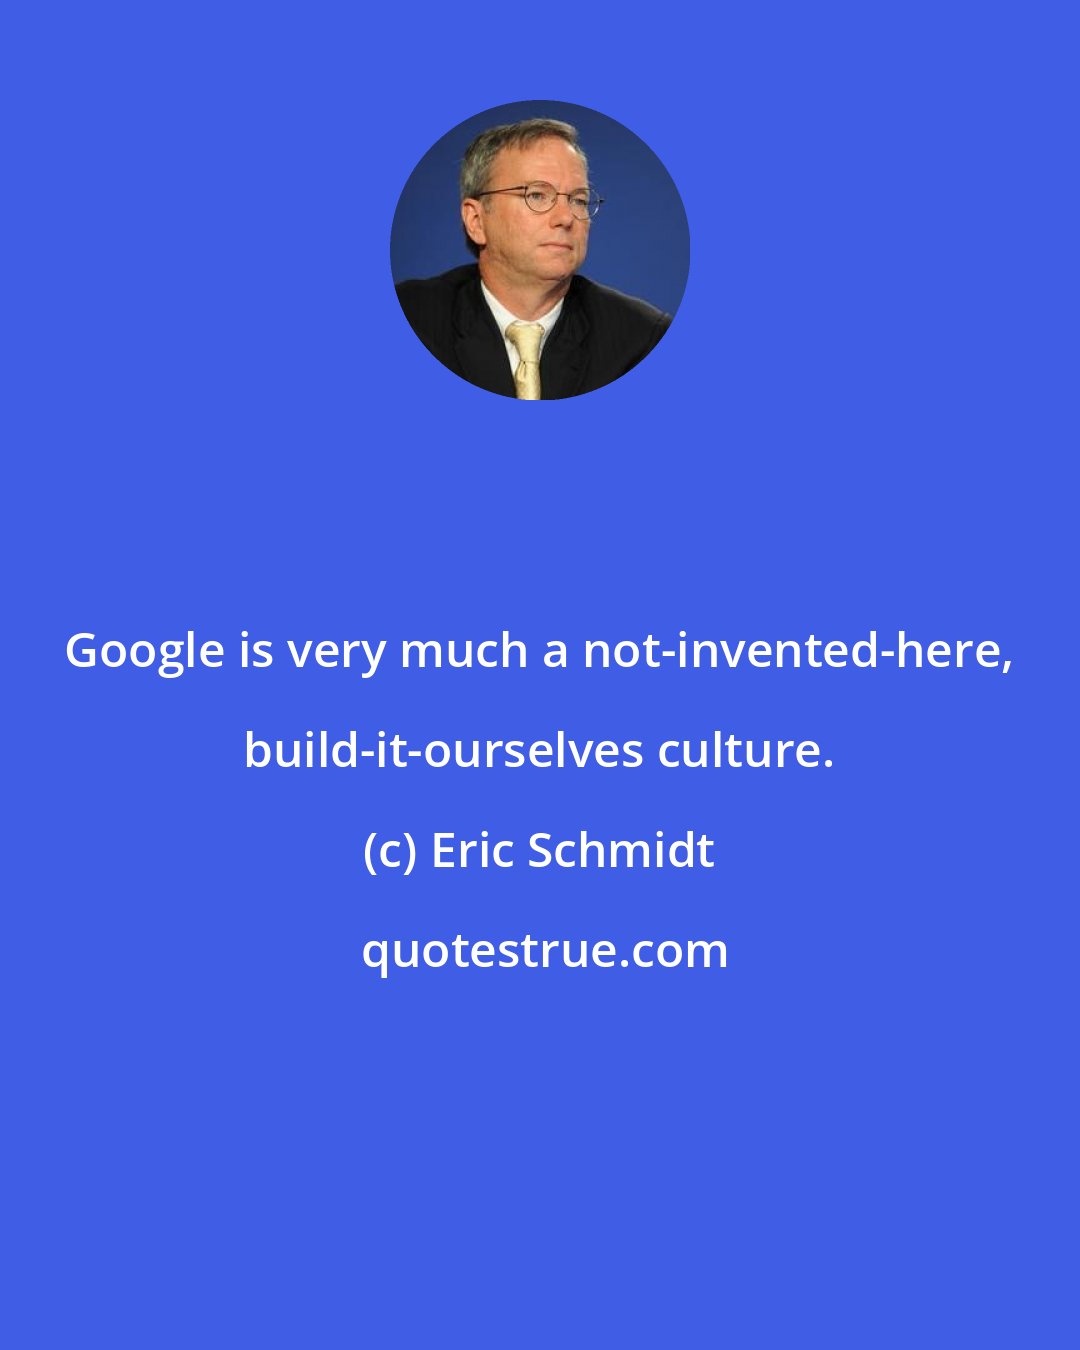 Eric Schmidt: Google is very much a not-invented-here, build-it-ourselves culture.